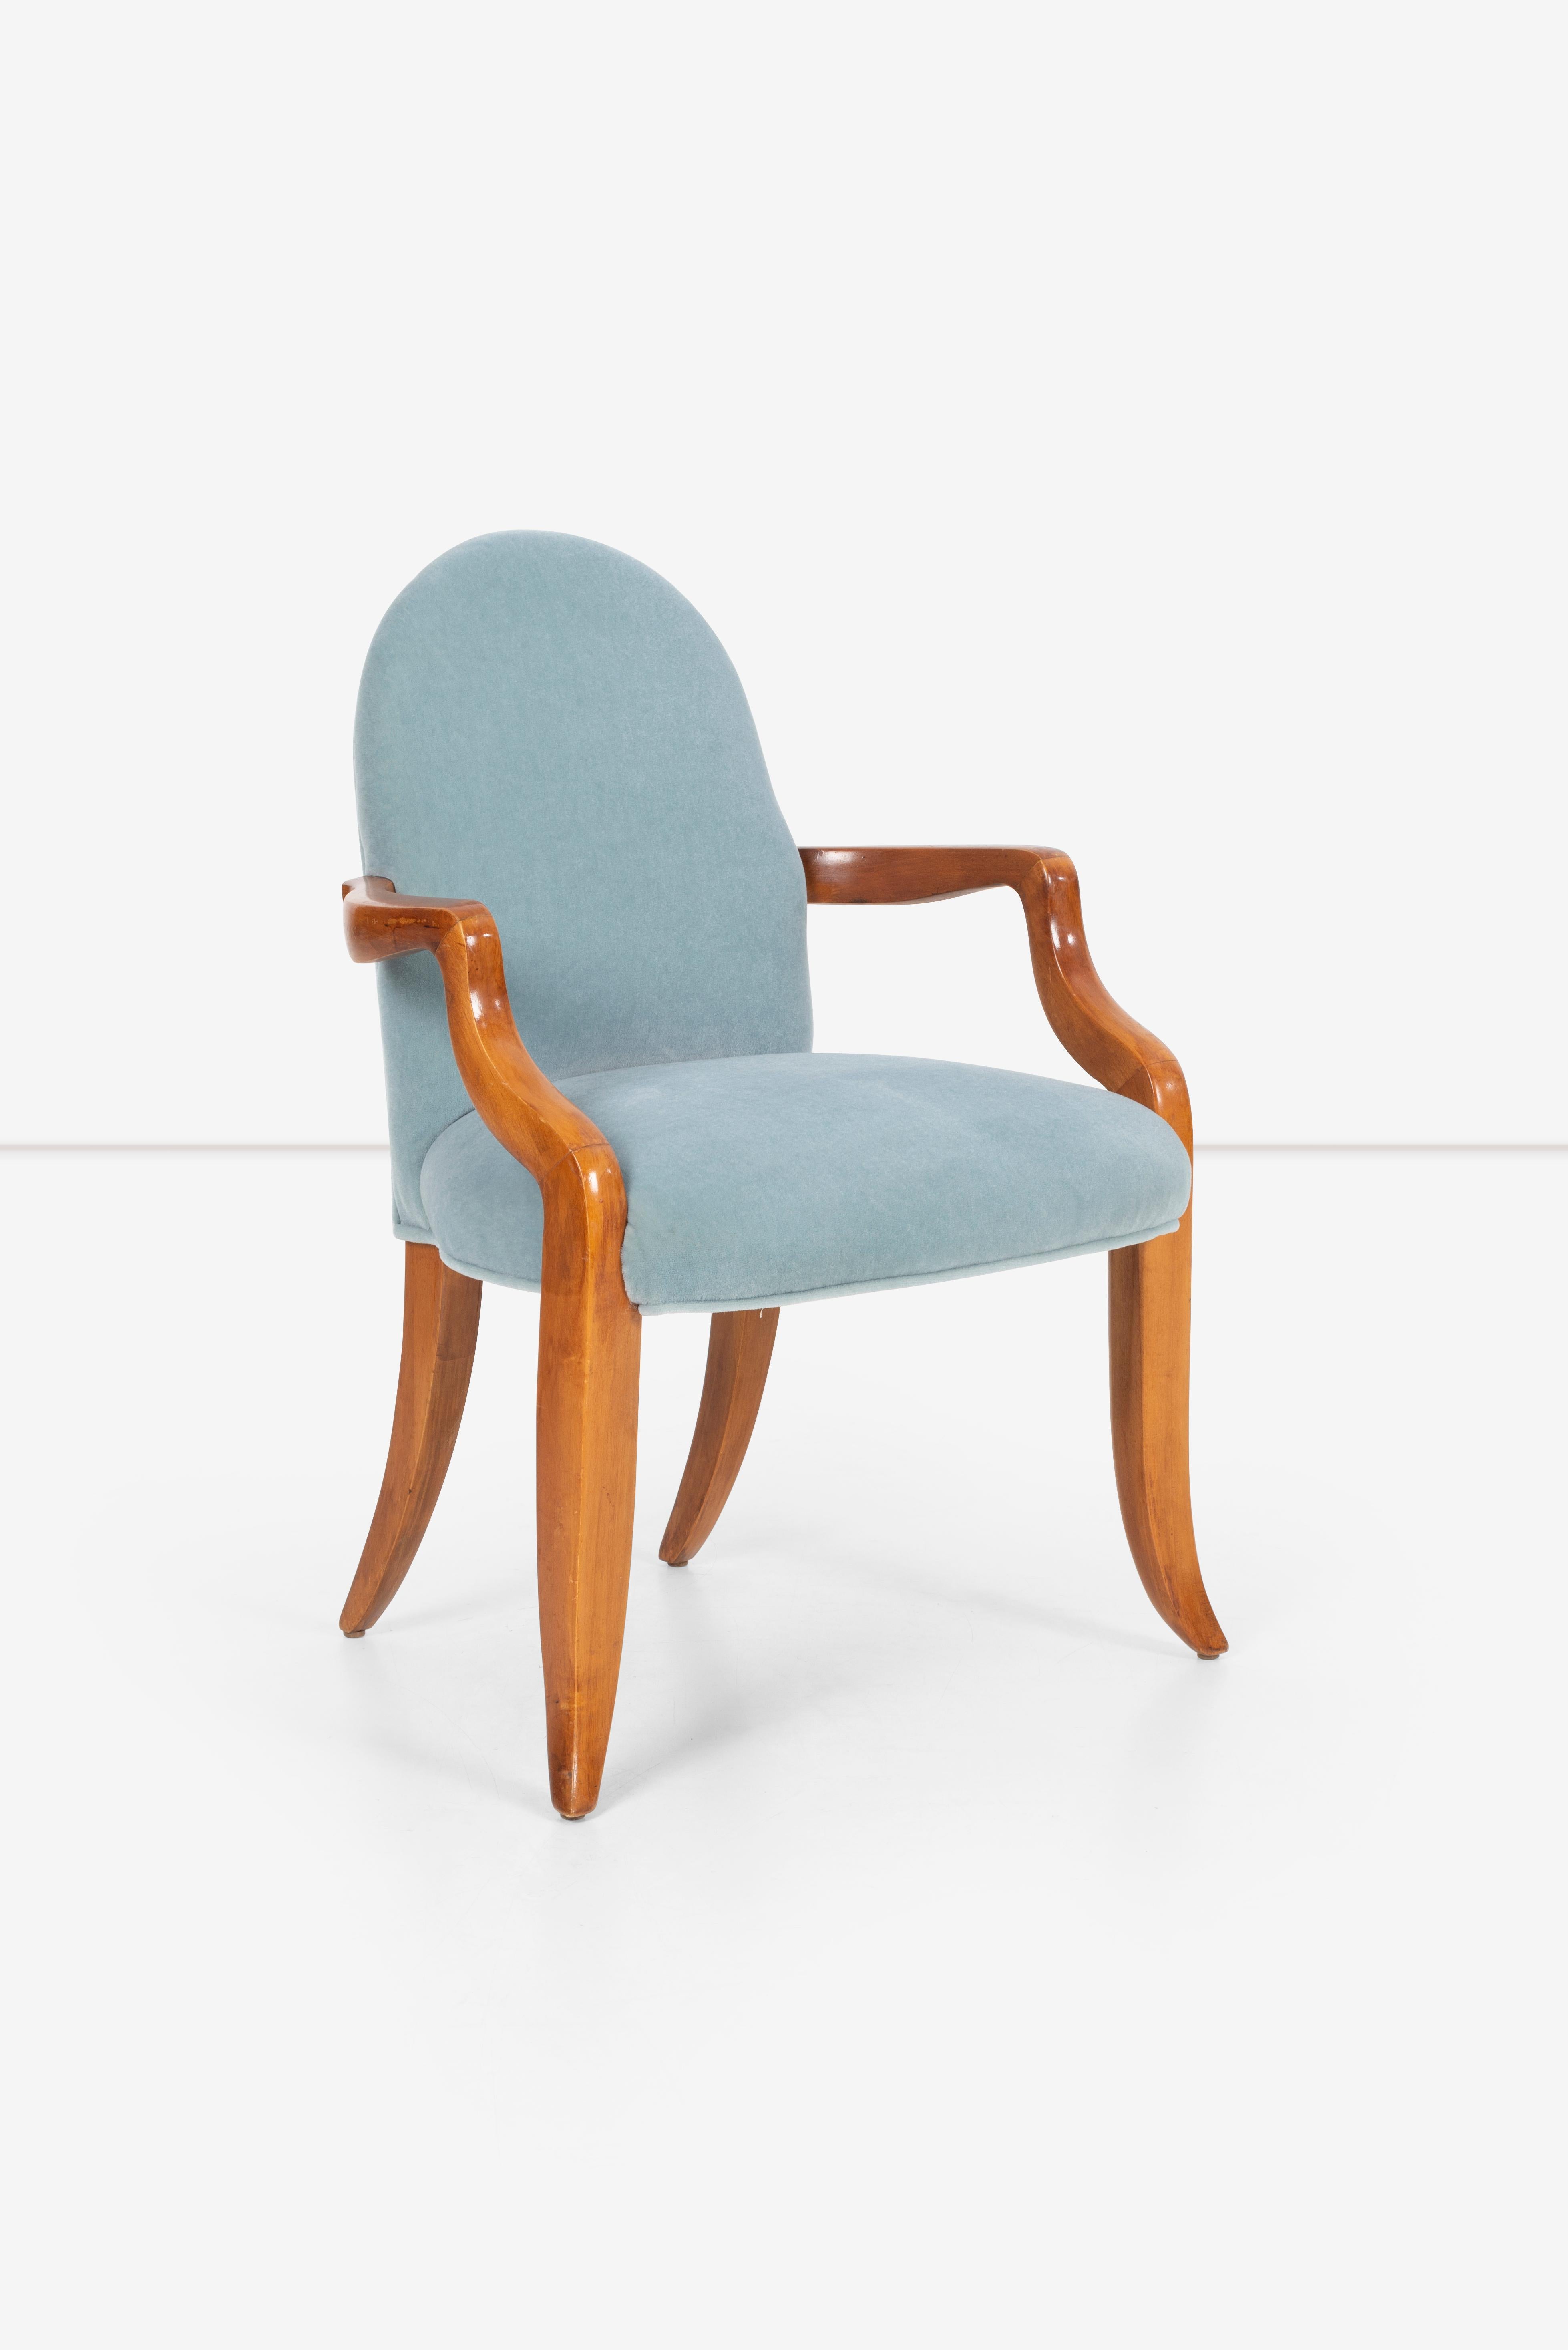 wendell castle chair